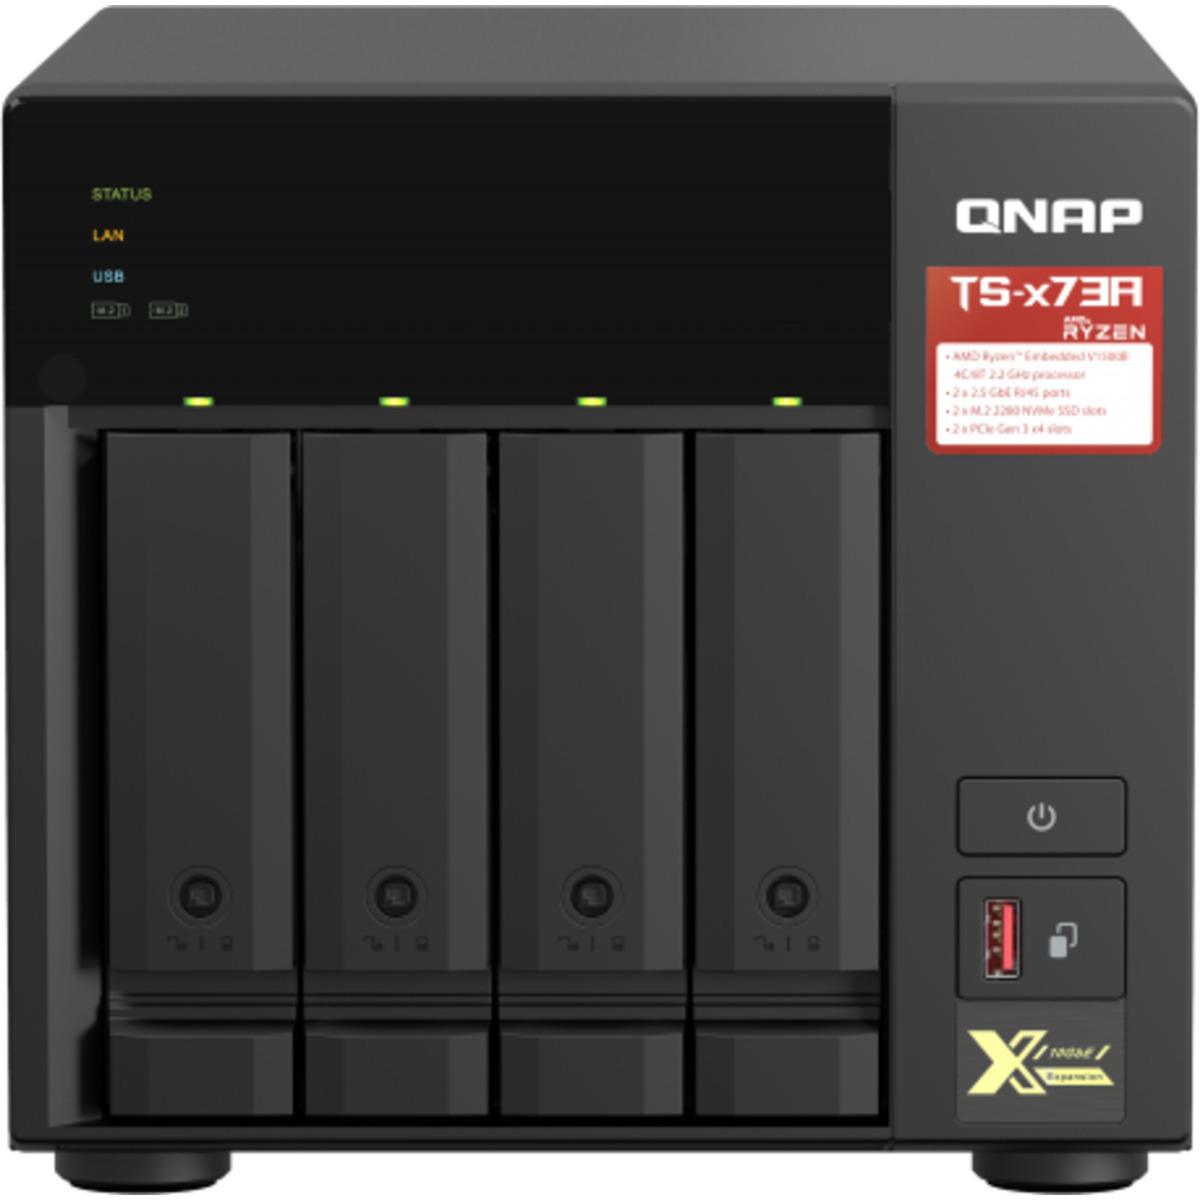 QNAP TS-473A 30tb 4-Bay Desktop Multimedia / Power User / Business NAS - Network Attached Storage Device 3x10tb Seagate IronWolf Pro ST10000NT001 3.5 7200rpm SATA 6Gb/s HDD NAS Class Drives Installed - Burn-In Tested - ON SALE TS-473A